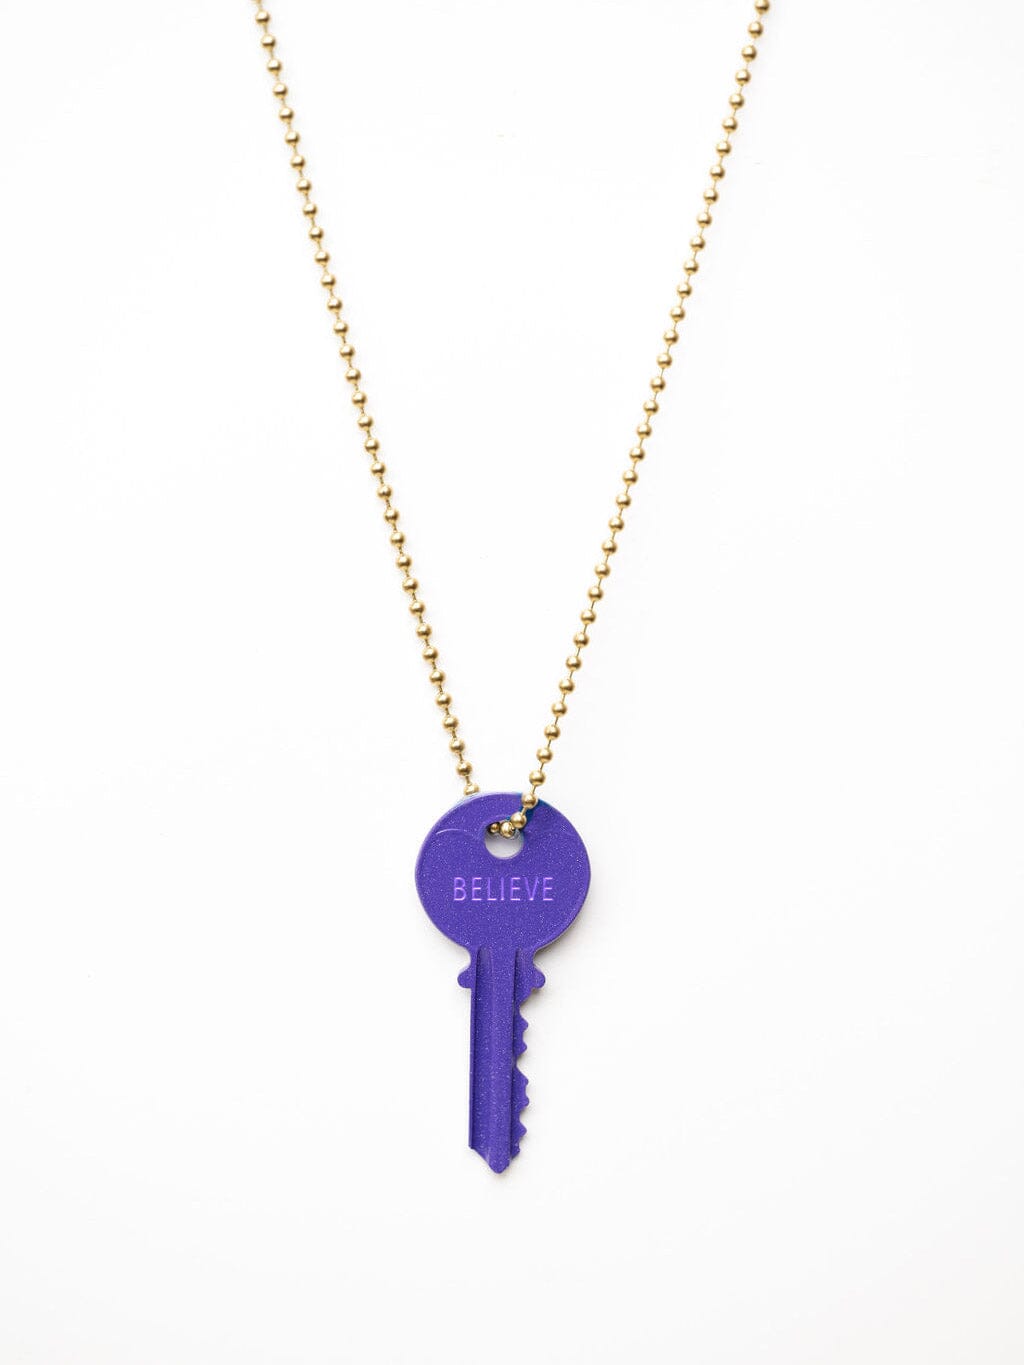 N - Dark Purple Classic Ball Chain Key Necklace Necklaces The Giving Keys Gold 